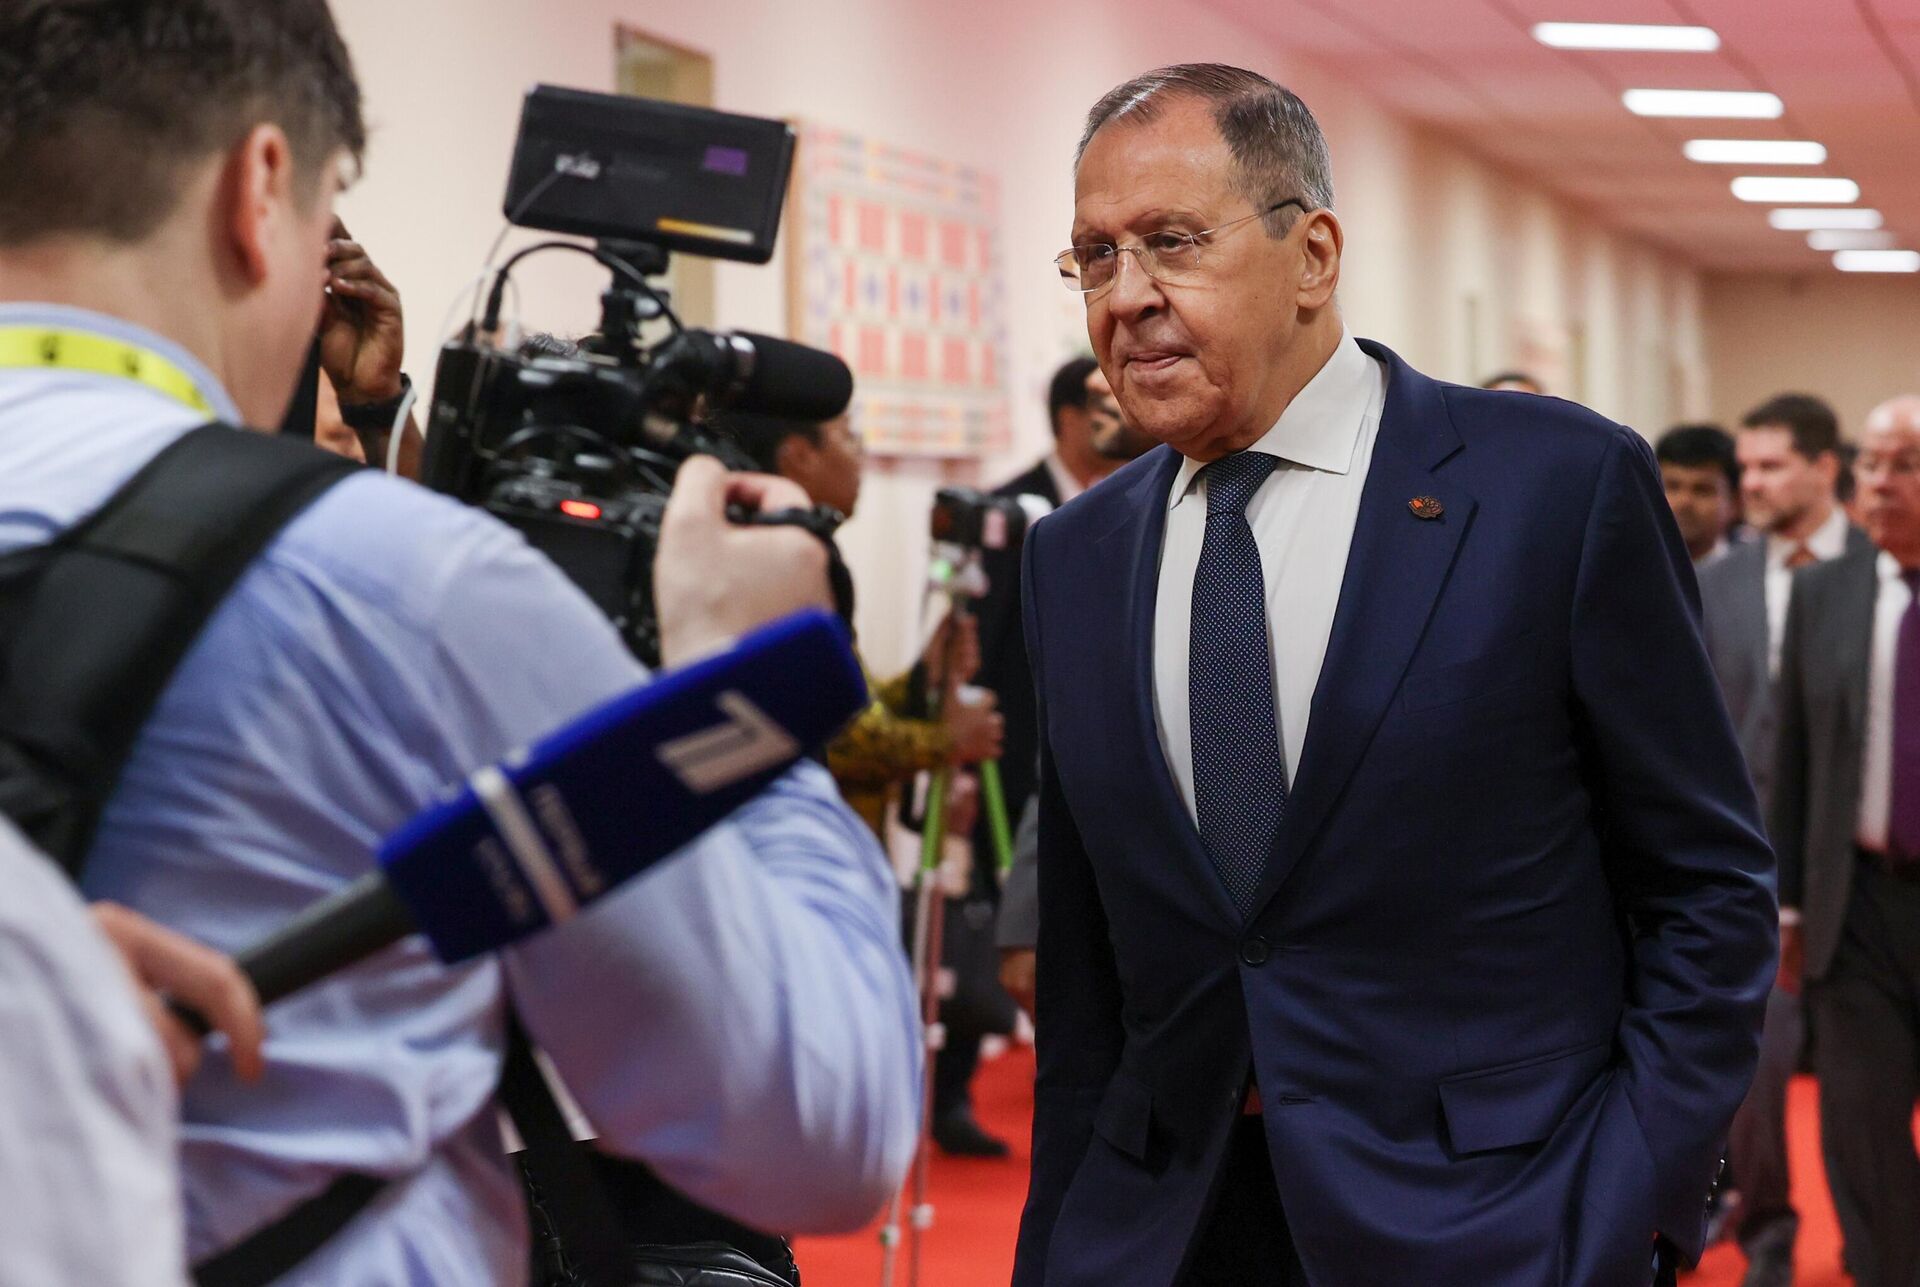 In this handout photo released by the Russian Foreign Ministry, Russian Foreign Minister Sergey Lavrov talks to the media during the G20 Foreign Ministers' Meeting (G20 FMM), in New Delhi, India. Editorial use only, no archive, no commercial use. - Sputnik International, 1920, 02.03.2023